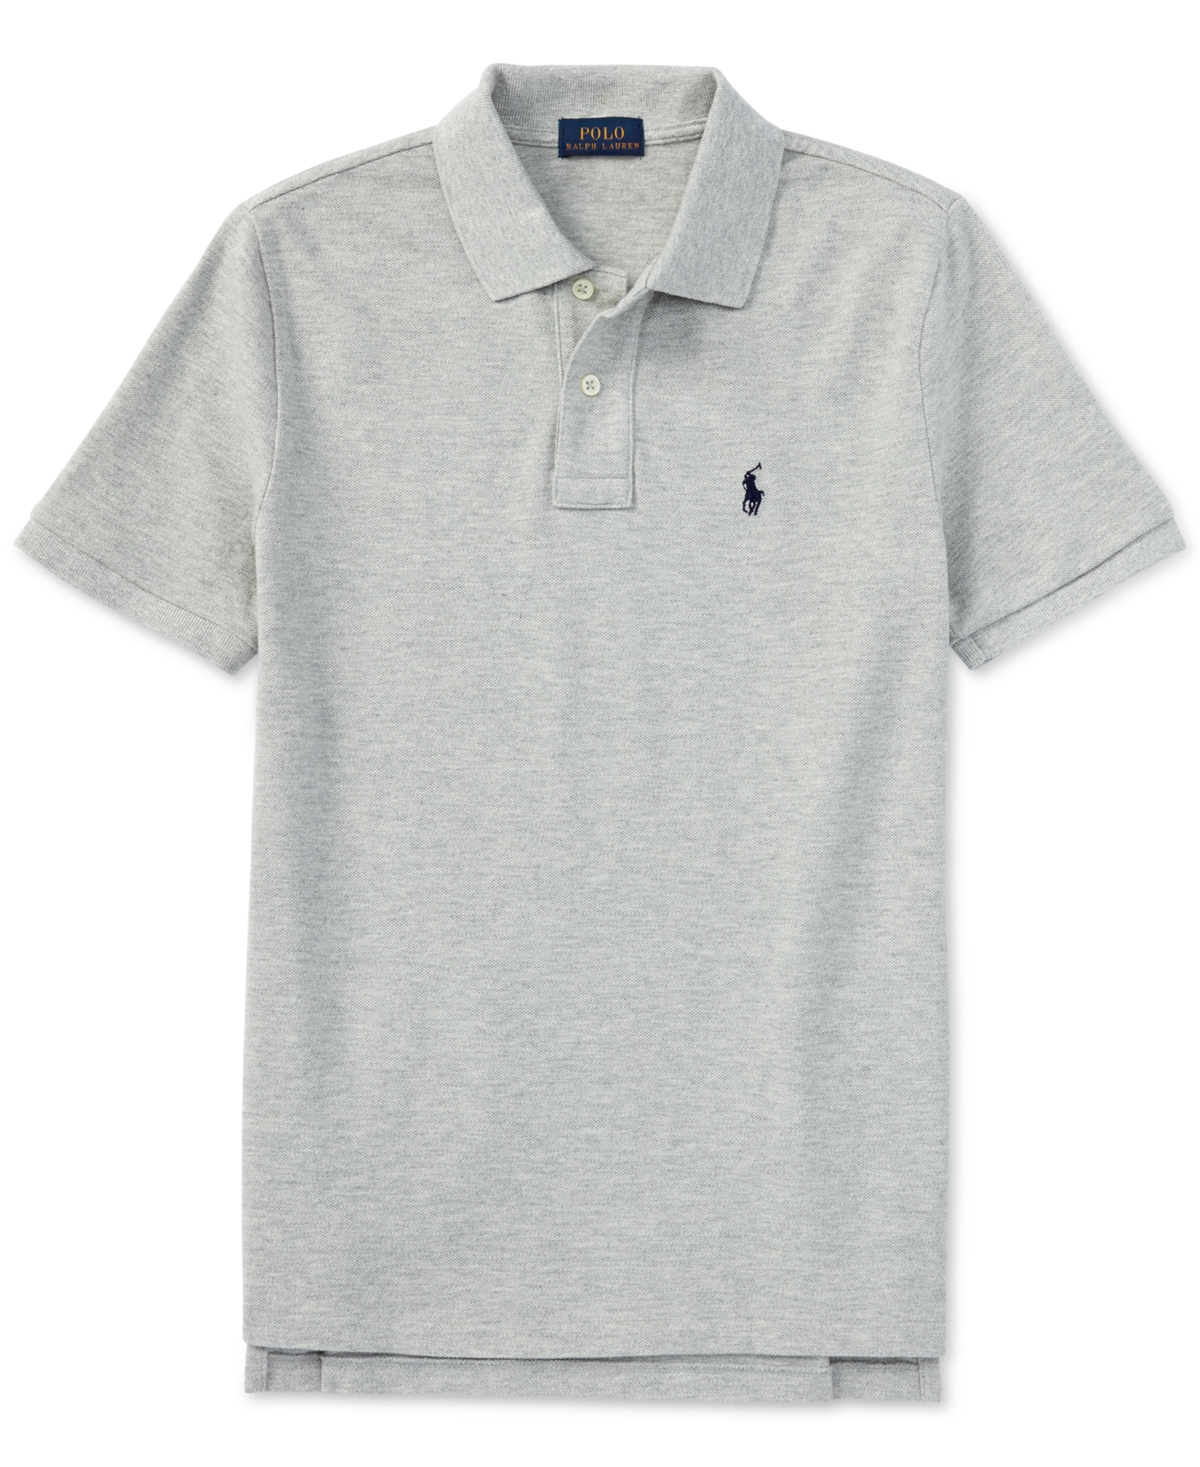 Polo Ralph Lauren Kids' Toddler And Little Boys Cotton Mesh Polo Shirt In New Grey Heather